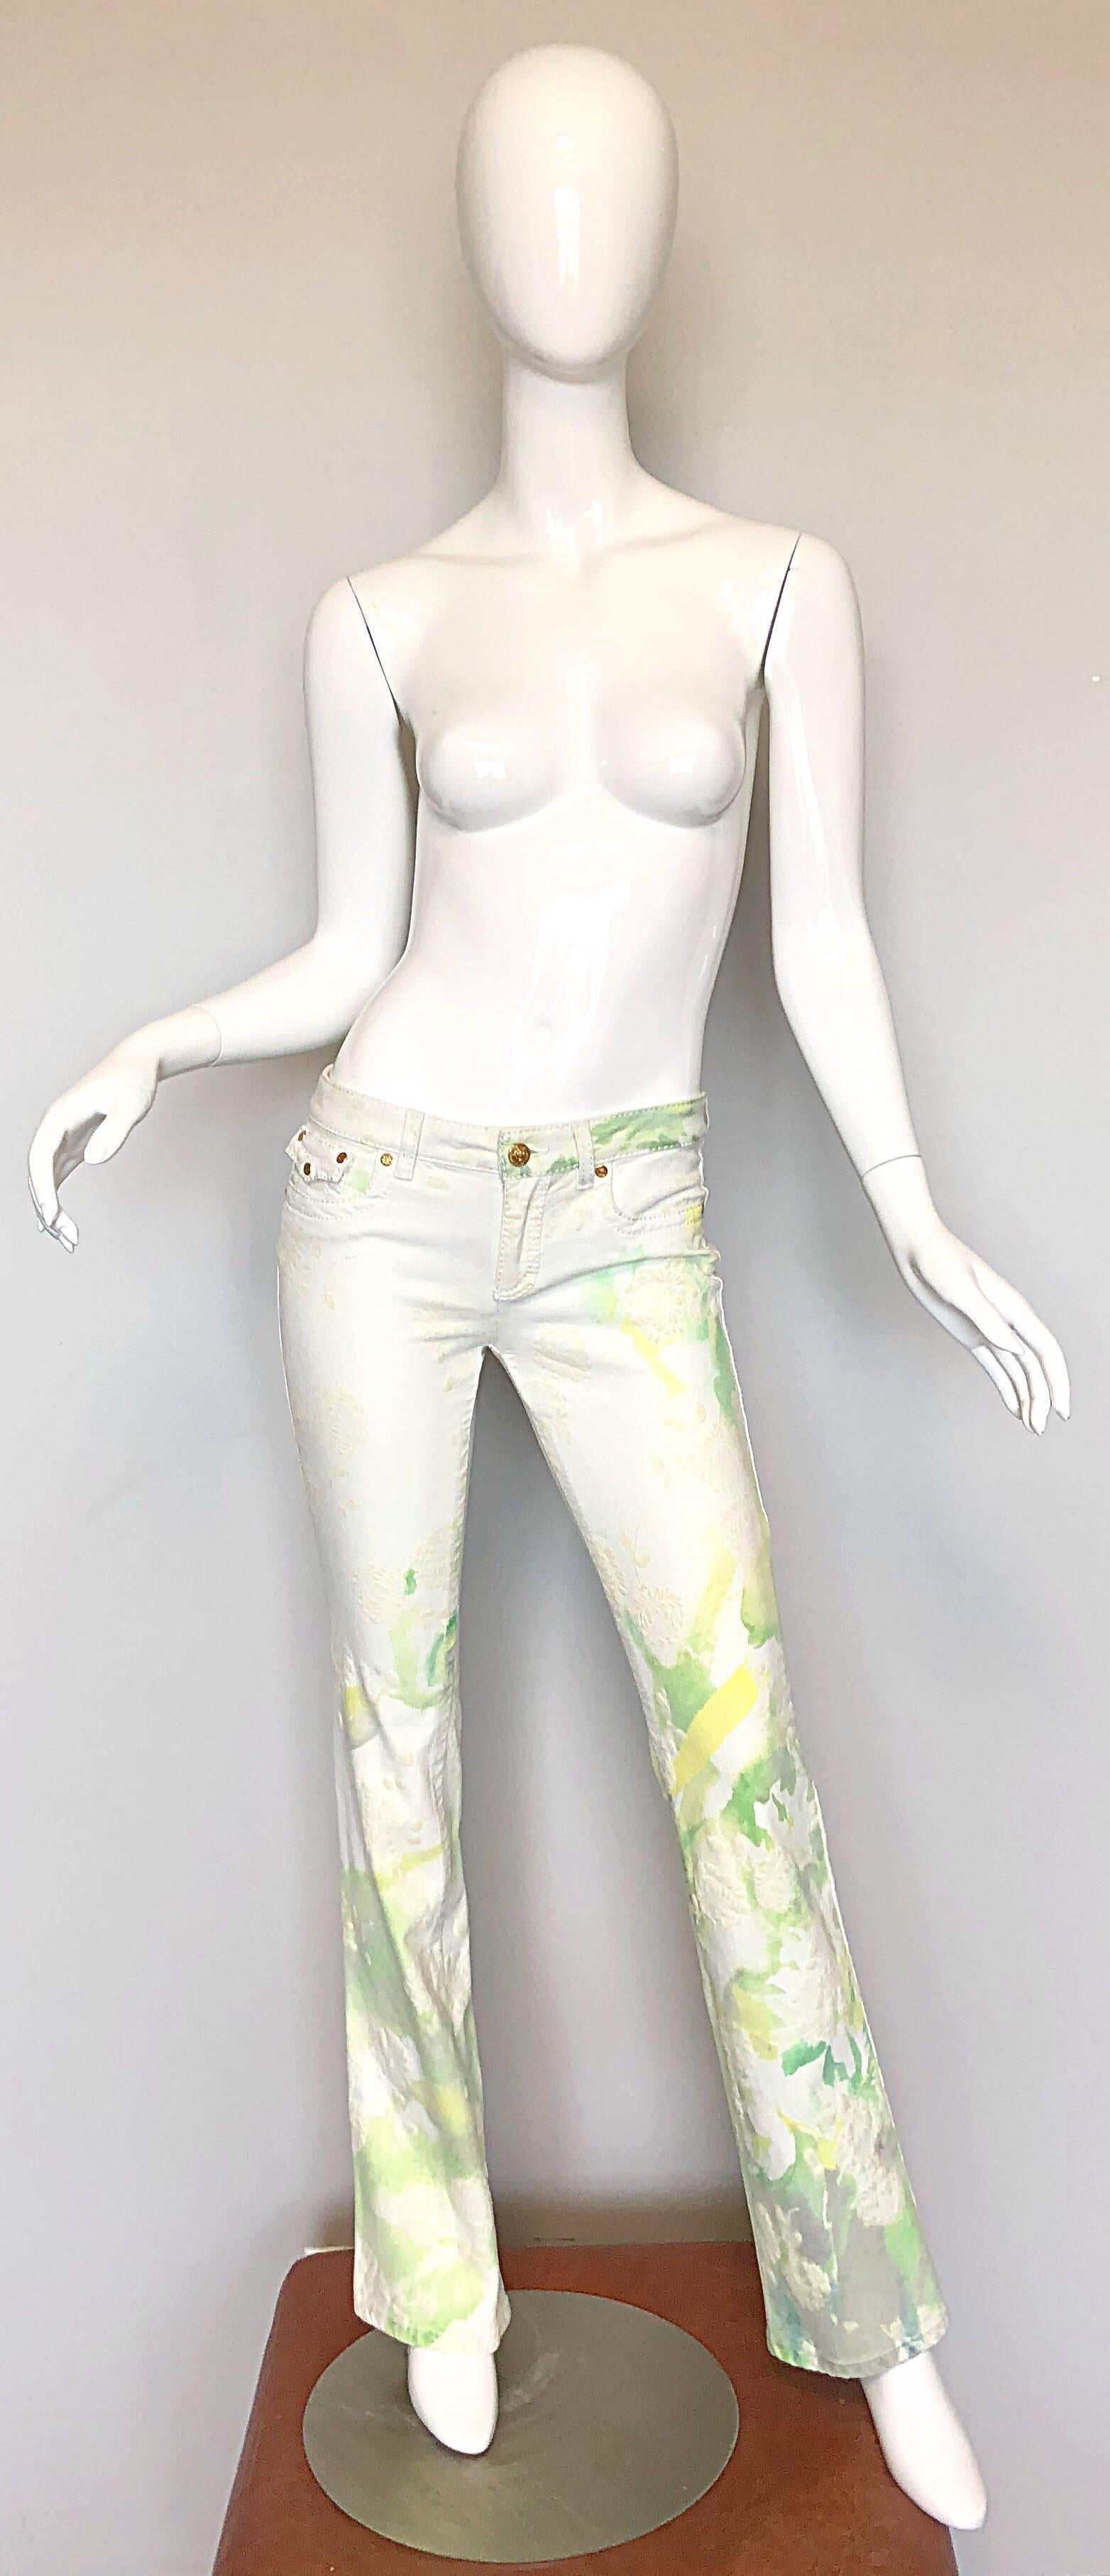 Amazing early 2000s vintage ROBERTO CAVALLI unworn lowrise boot cut trousers / jeans! Features a flattering low rise cut that sits at the hips. Slim legs, with a slightly flared hem. Stretchy denim like fabric. Belt loops and gold button closure at